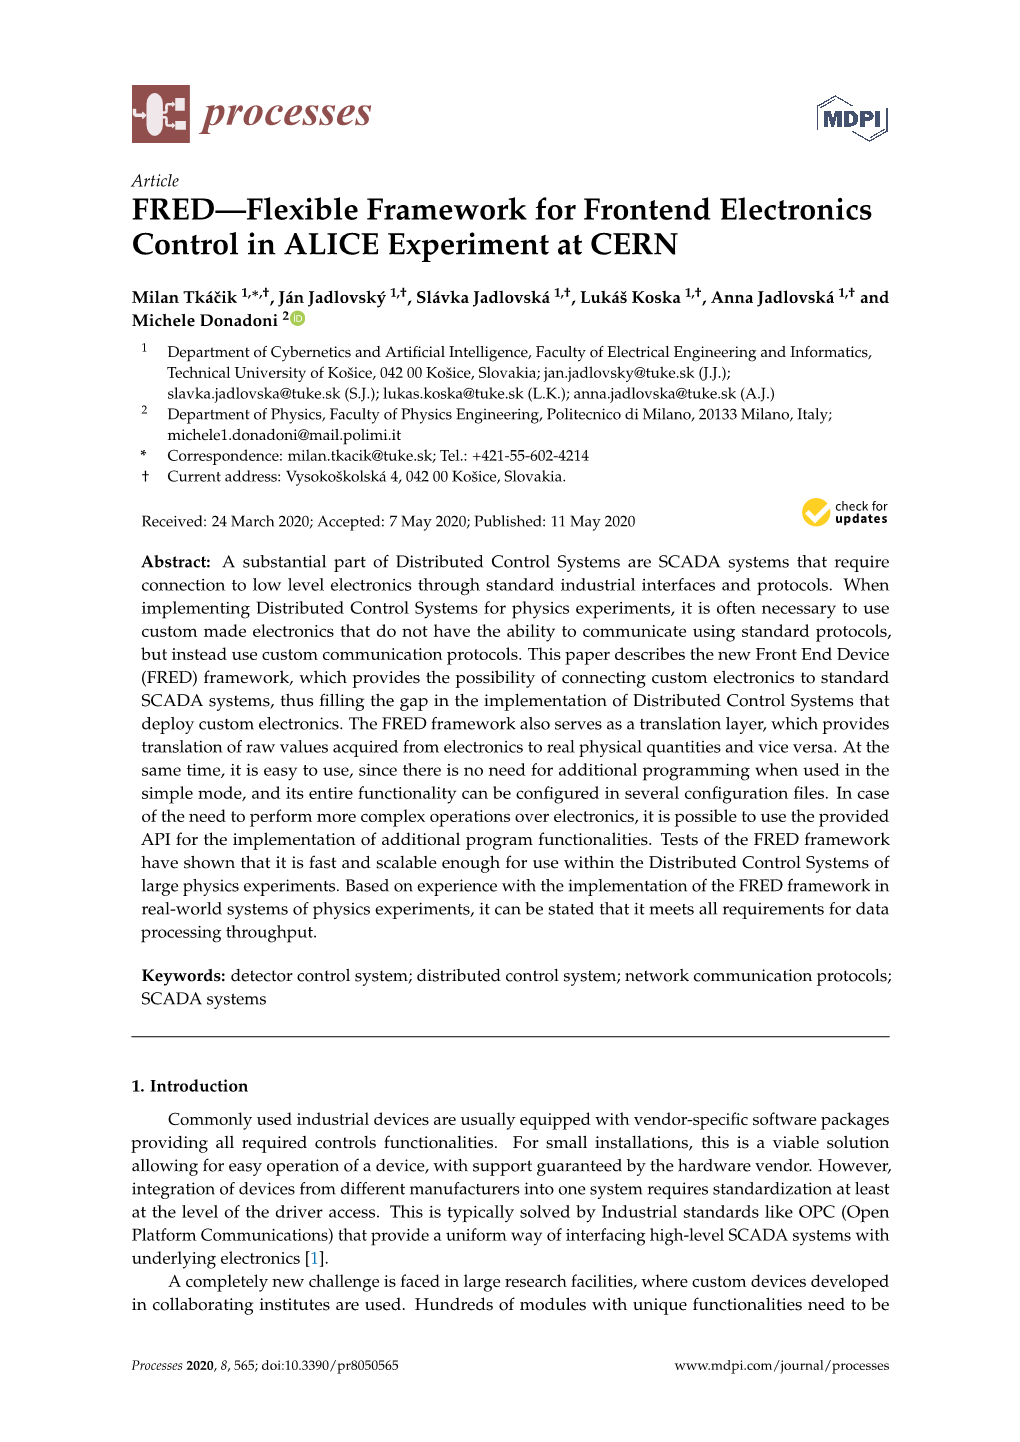 FRED—Flexible Framework for Frontend Electronics Control in ALICE Experiment at CERN